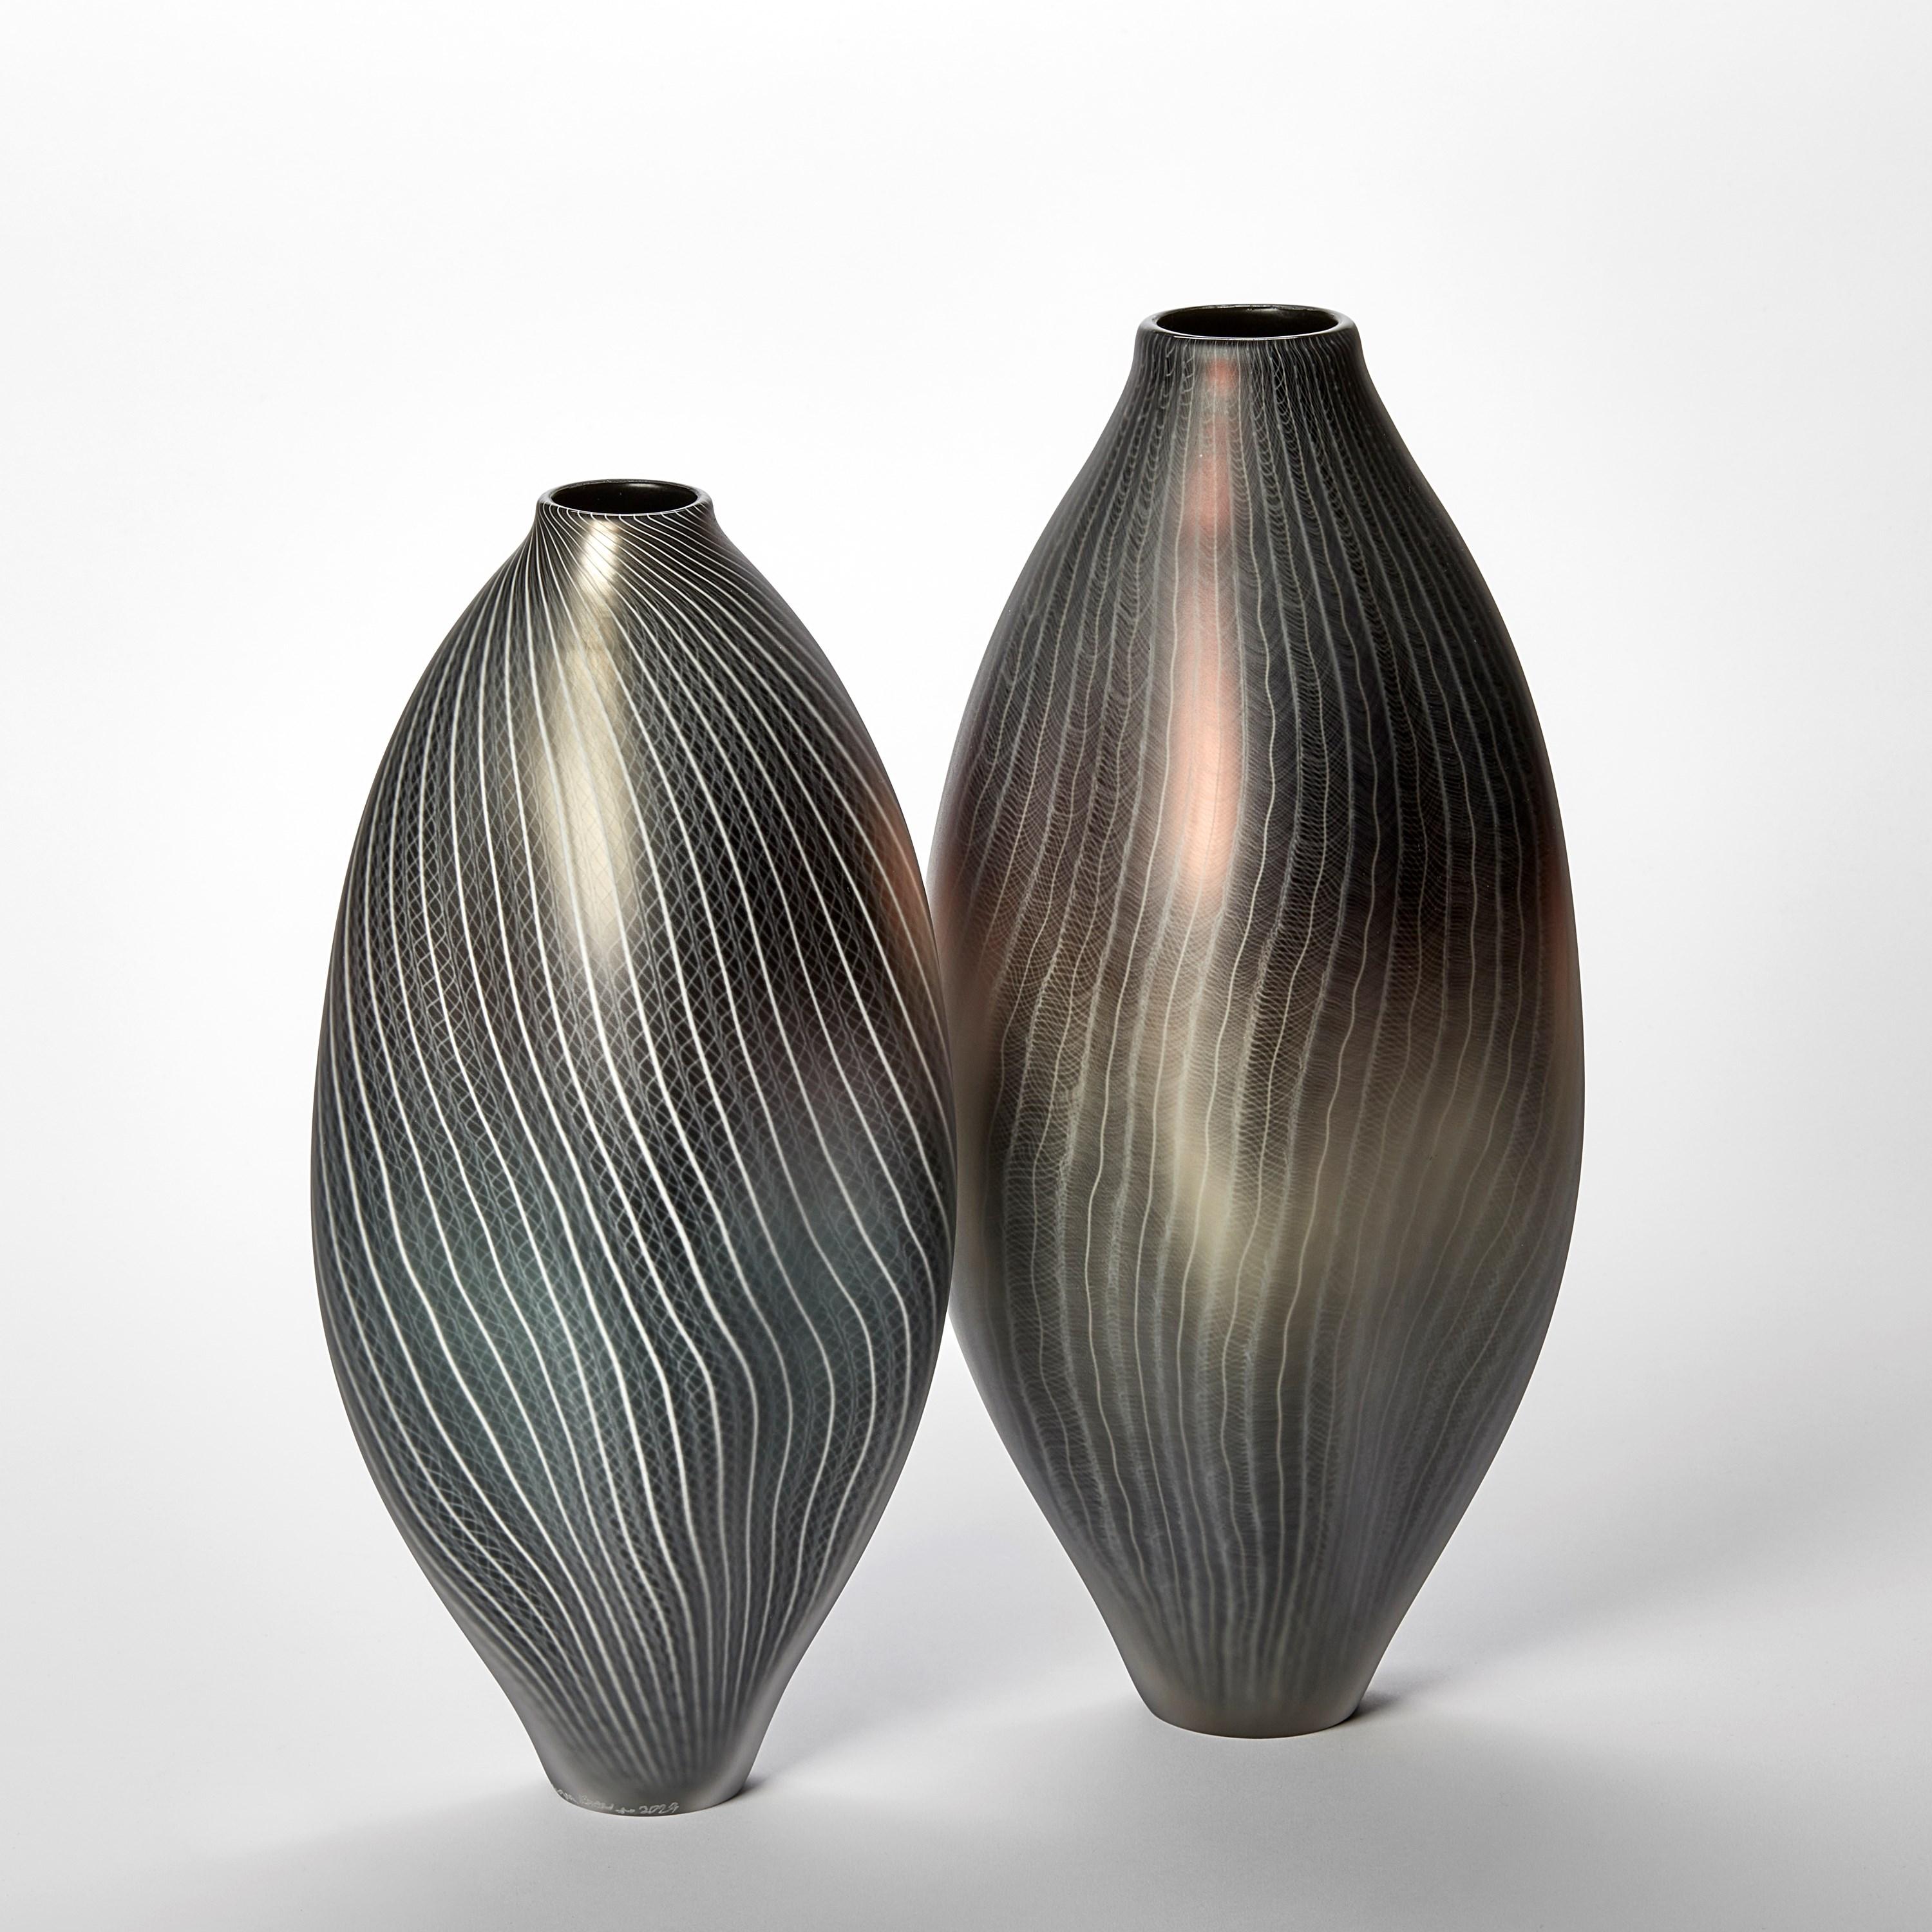 Hand-Crafted  Stratiform 2.1.002, bronze & grey sculptural glass vessel by Liam Reeves For Sale